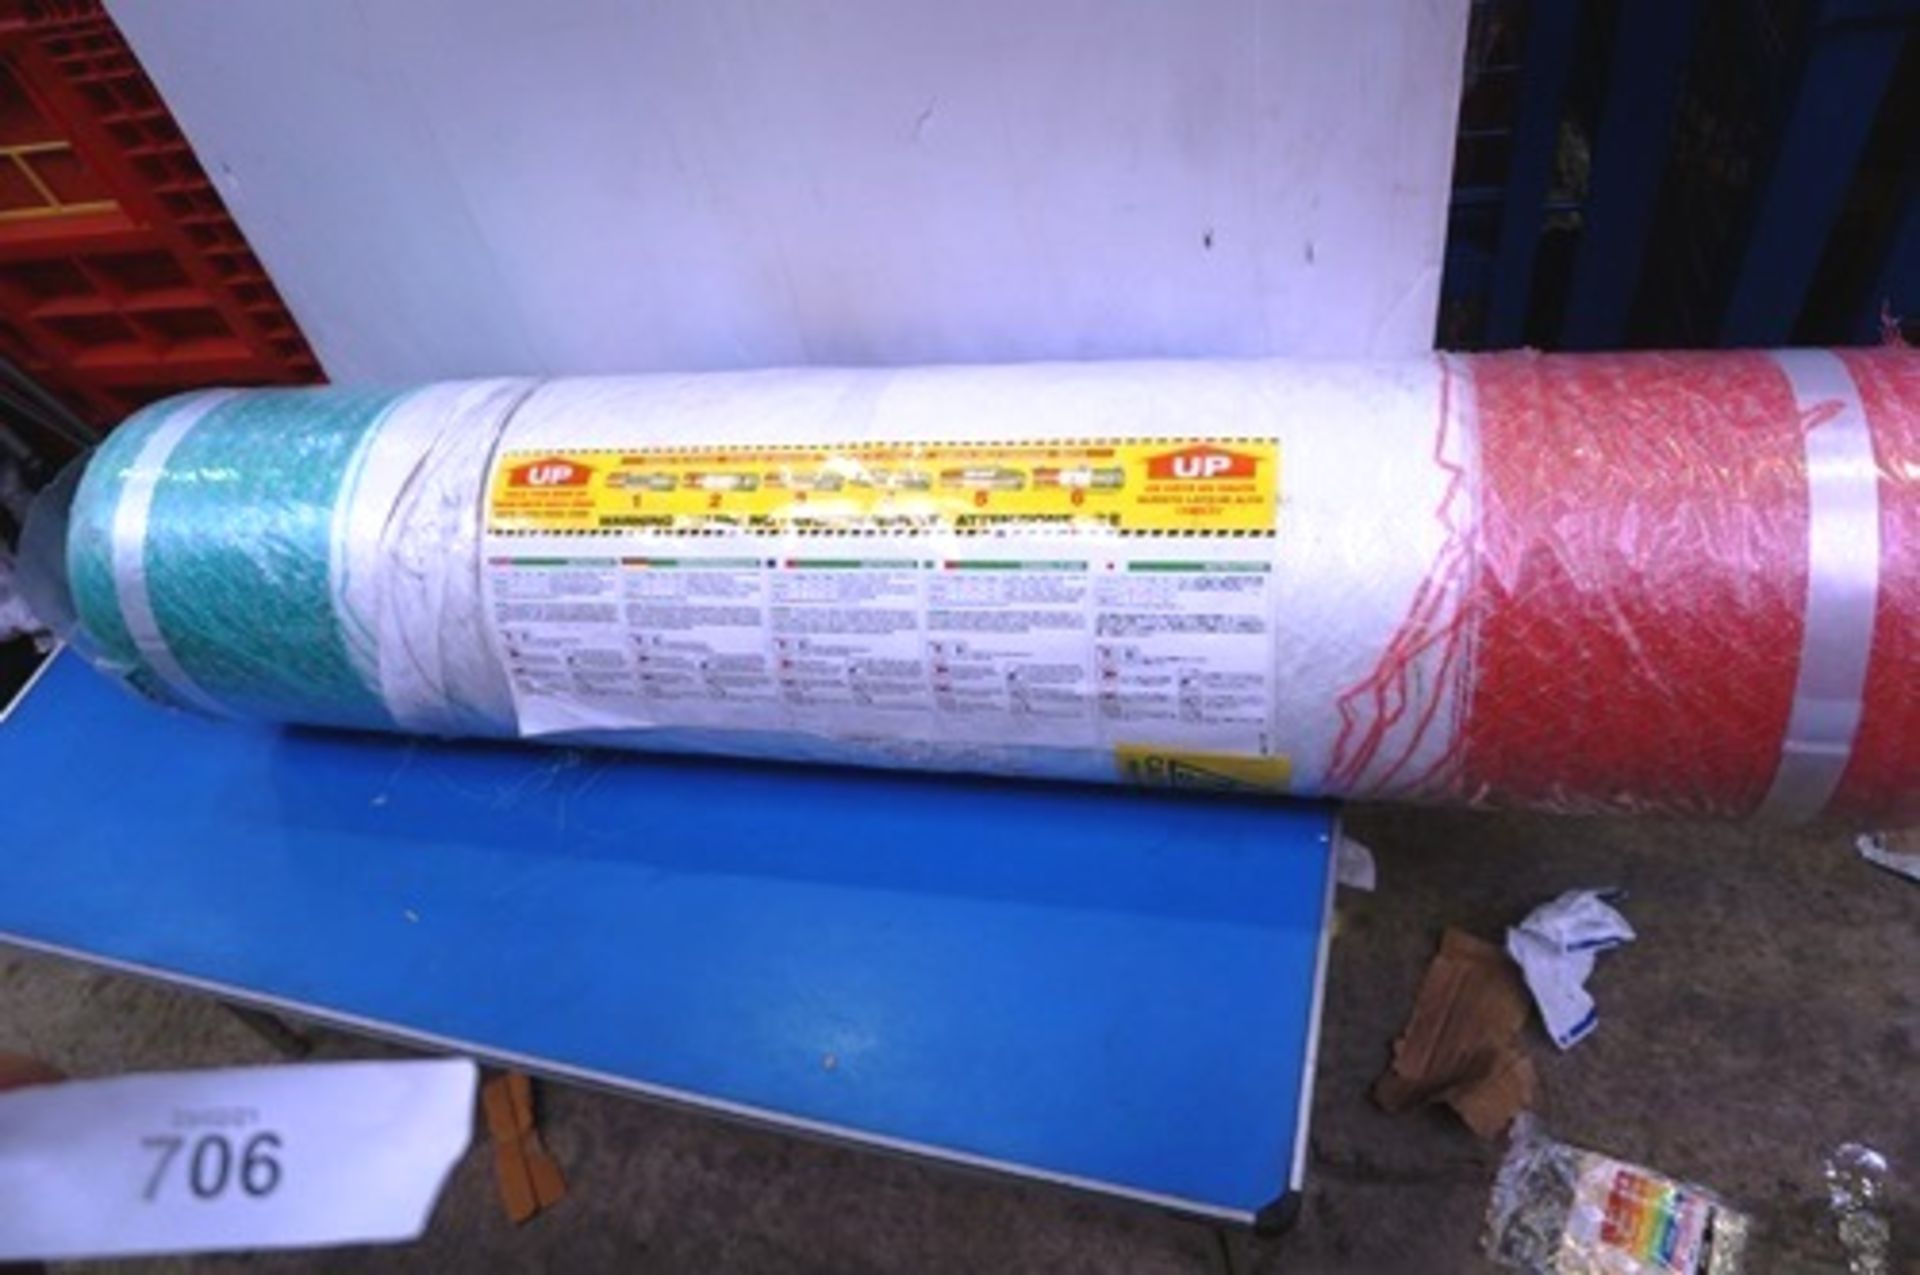 1 x 3600m roll of Novatex Winner Advance Silage net wrap, RRP £220.00 - Sealed new in pack (GS37)